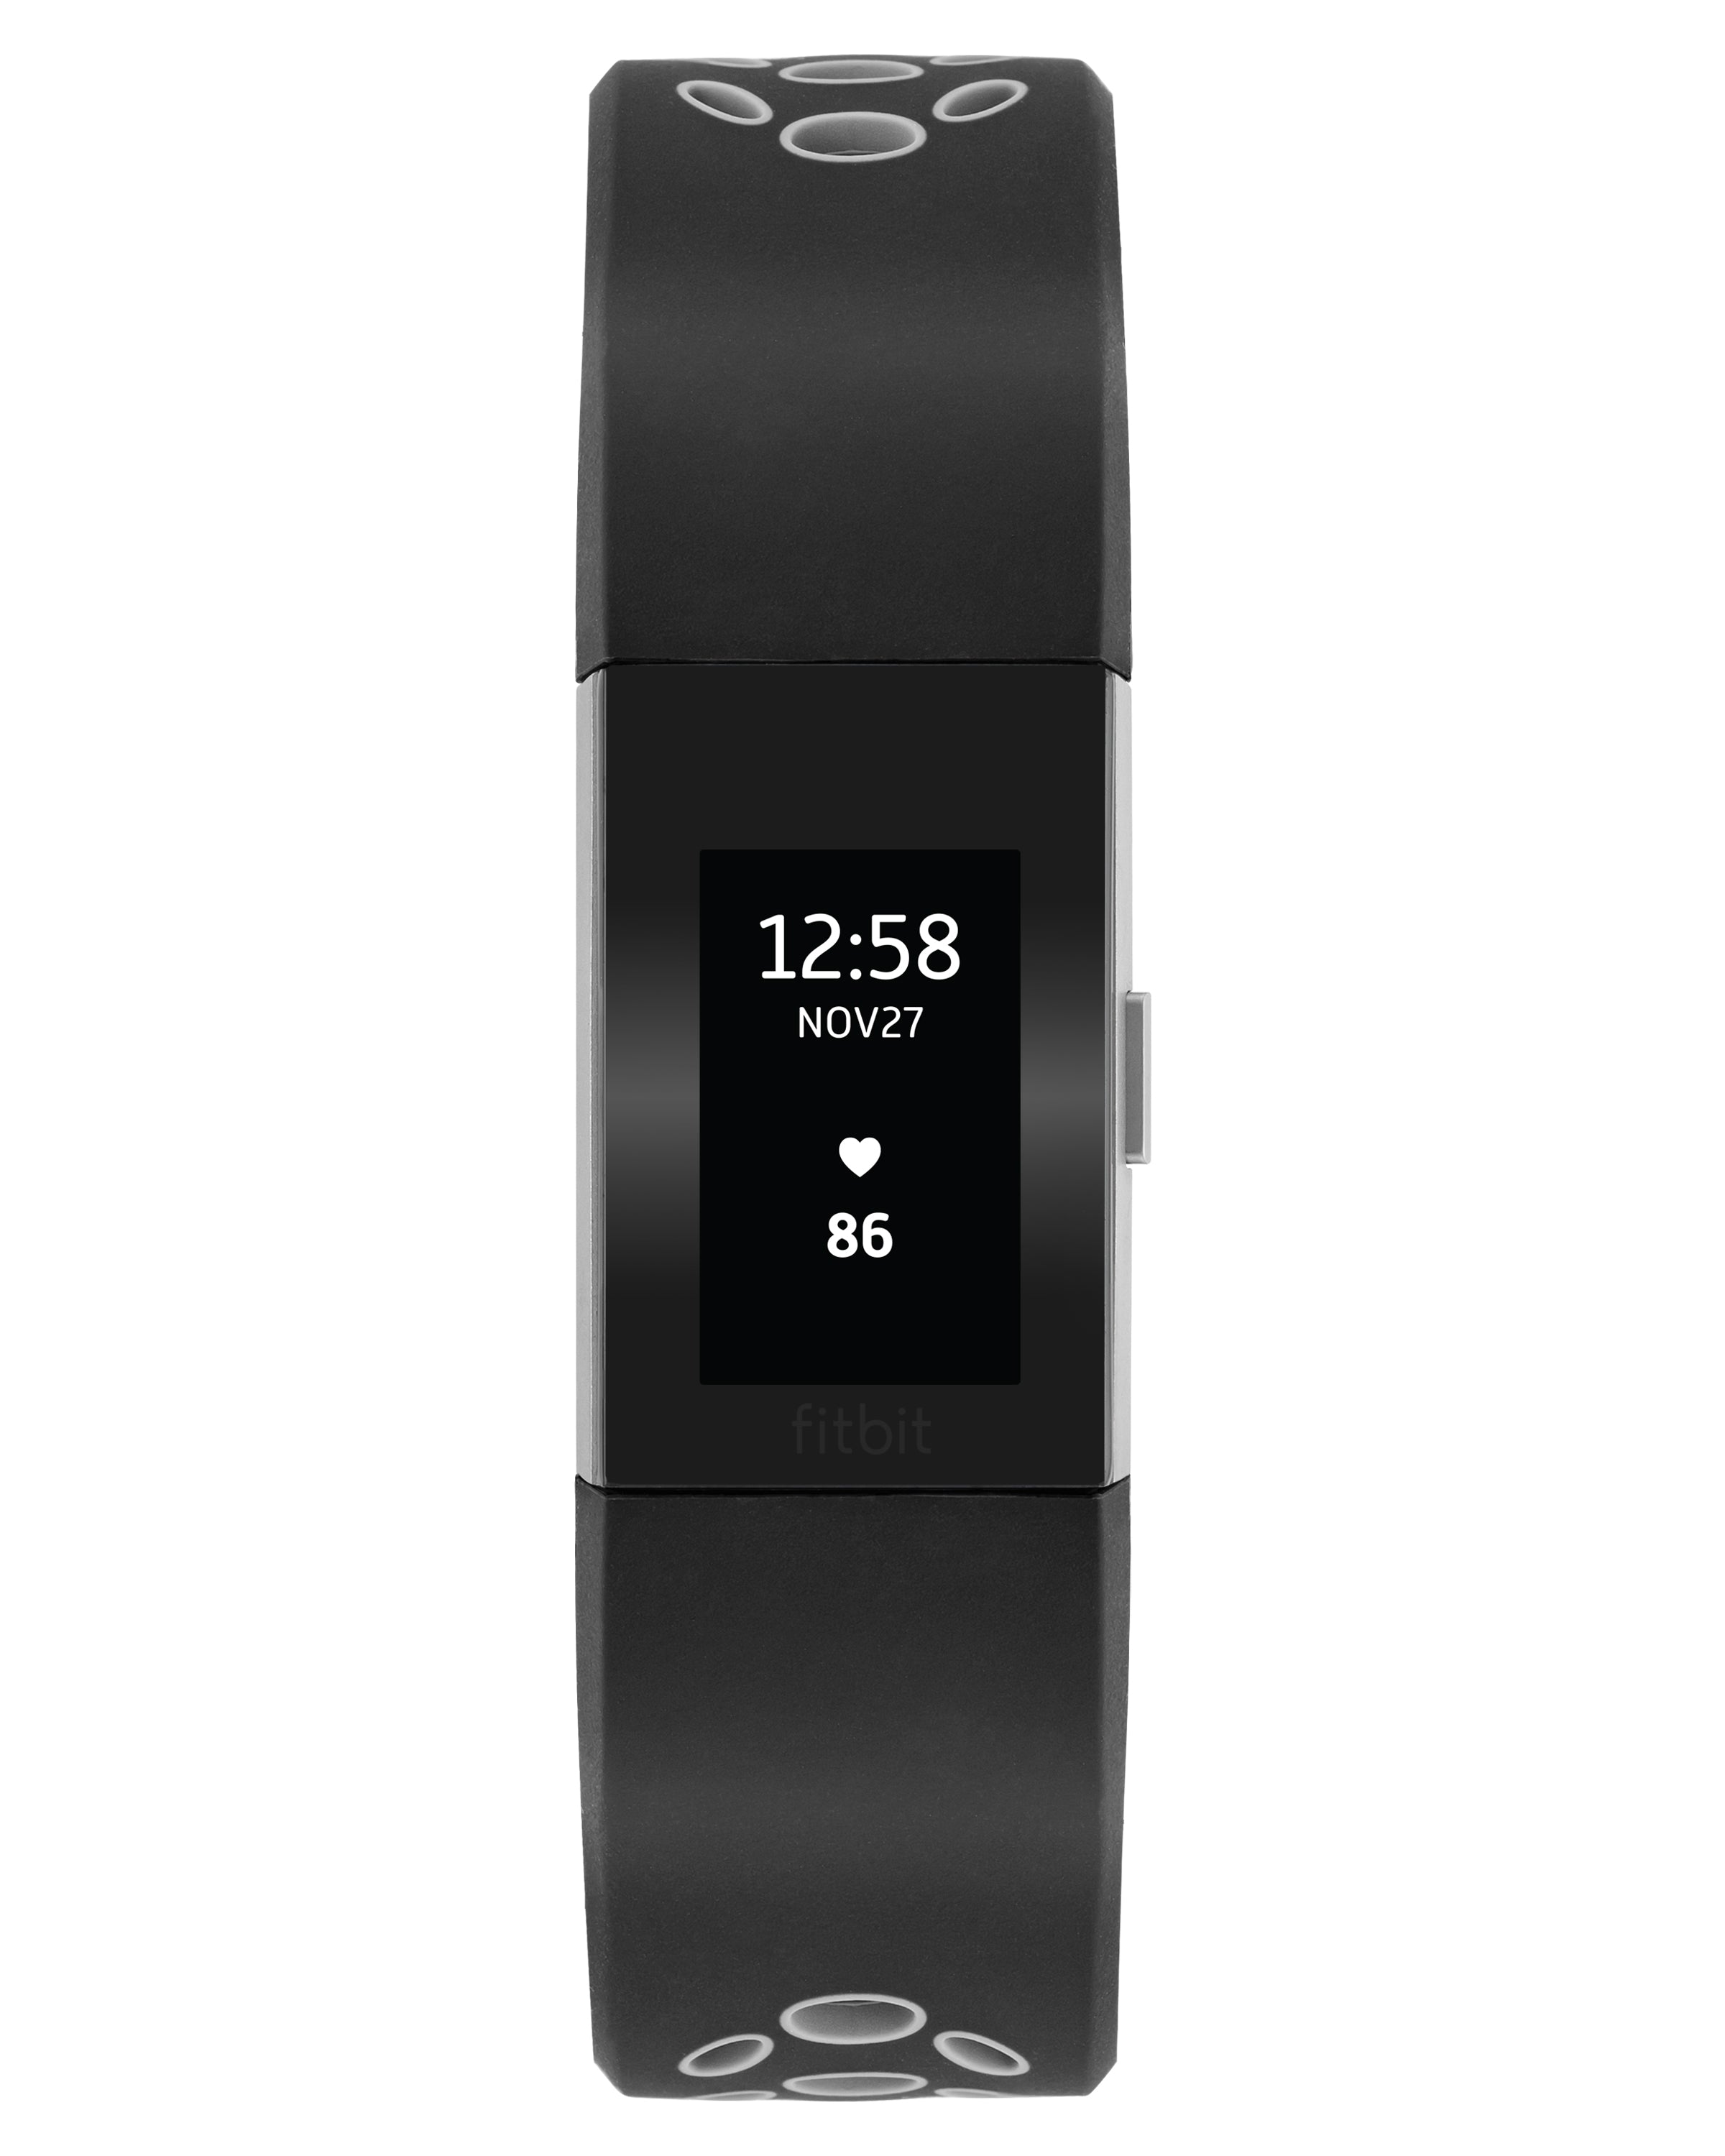 WITHit Fitbit Versa 3 & Fitbit Sense Silicone One size fits all